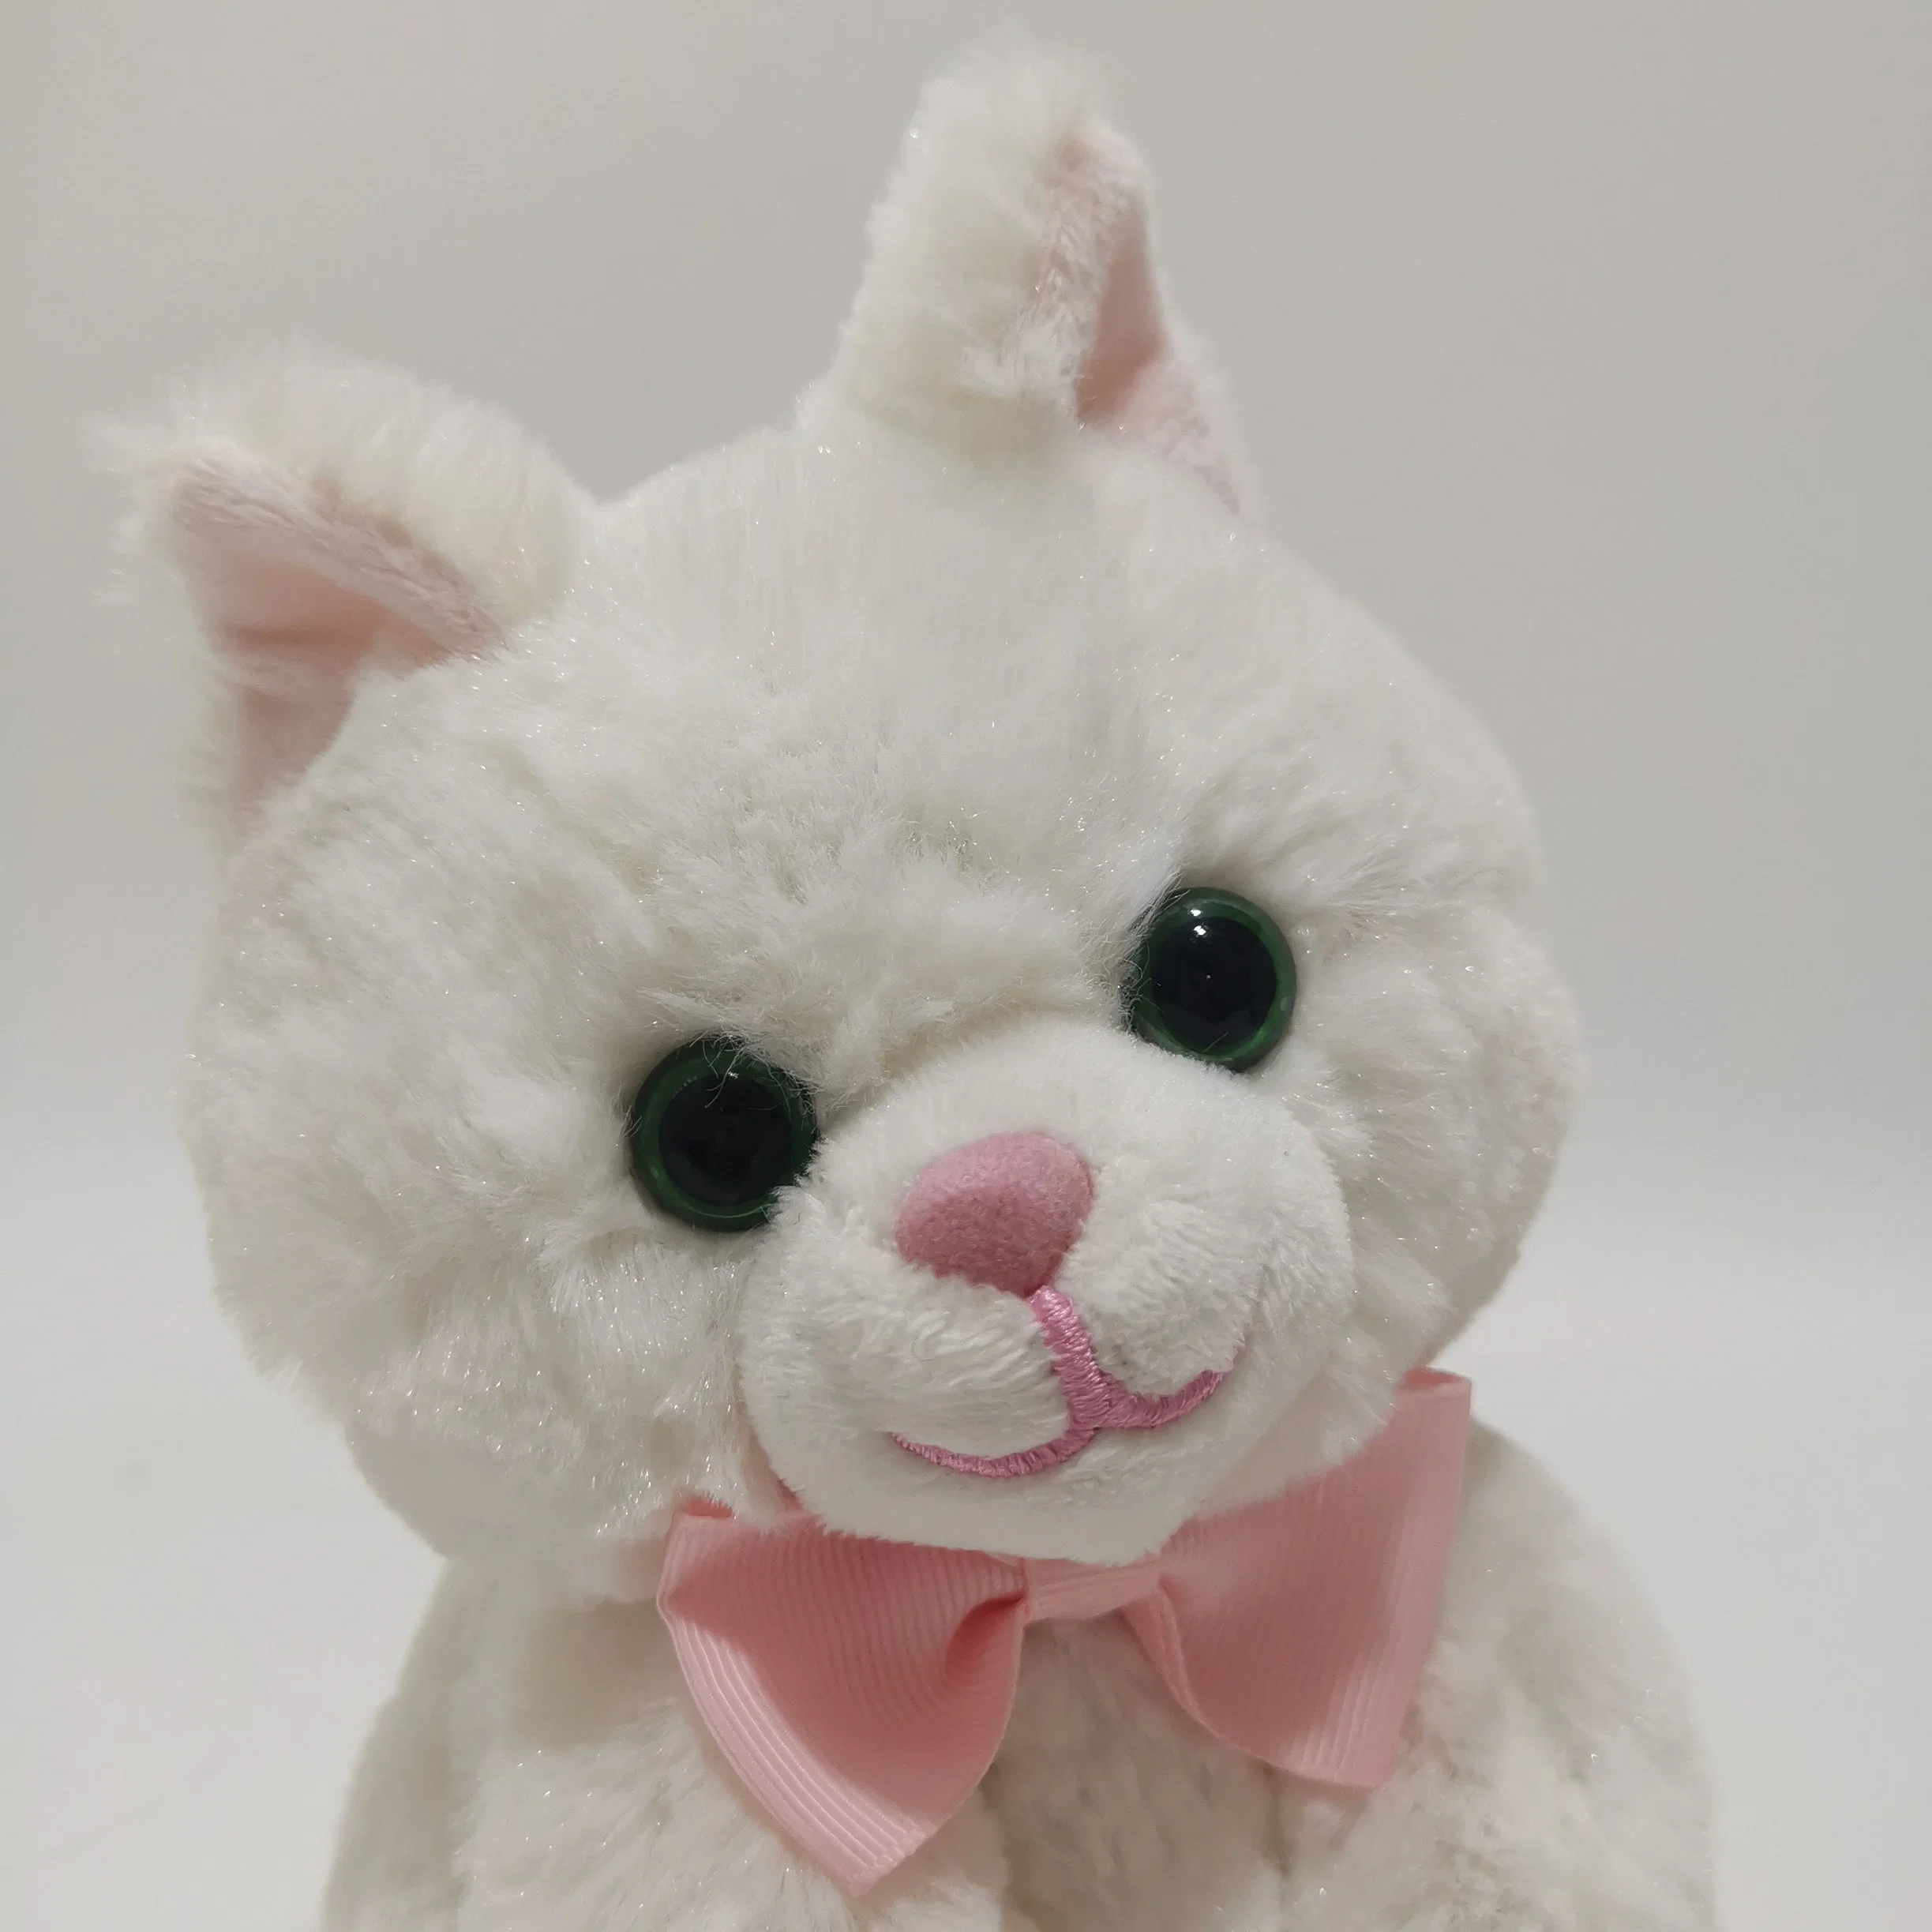 Amazon Hot Selling Item Talking Back White Cat Animated Plush Toys for Children Play with Other BSCI Factory